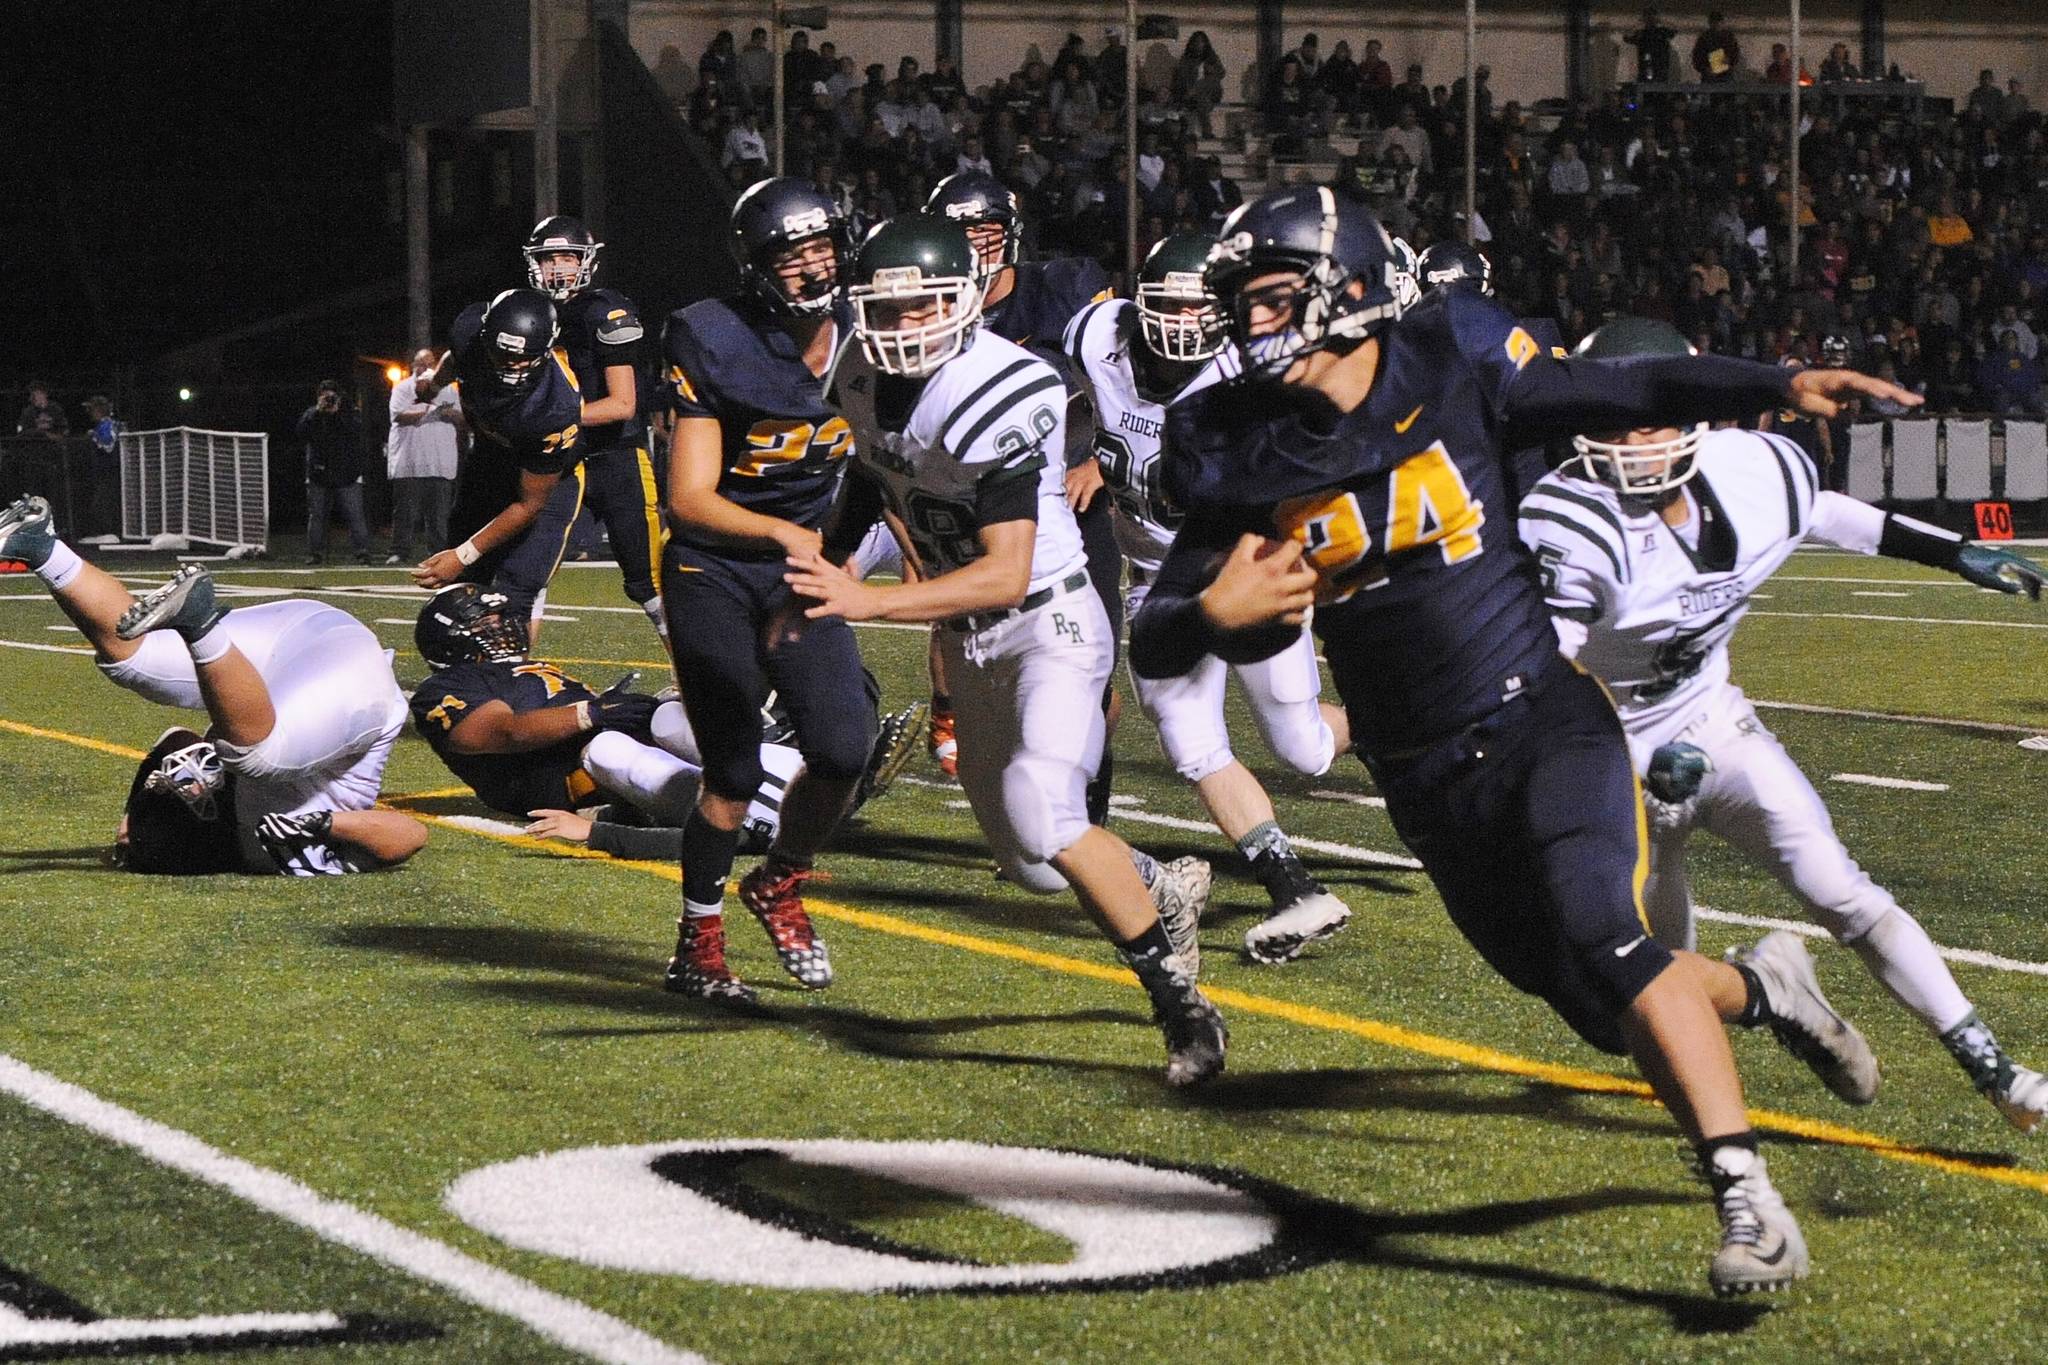 Spartan Colby Demorest (24) runs around the end for a good gain down to the one-yard line.